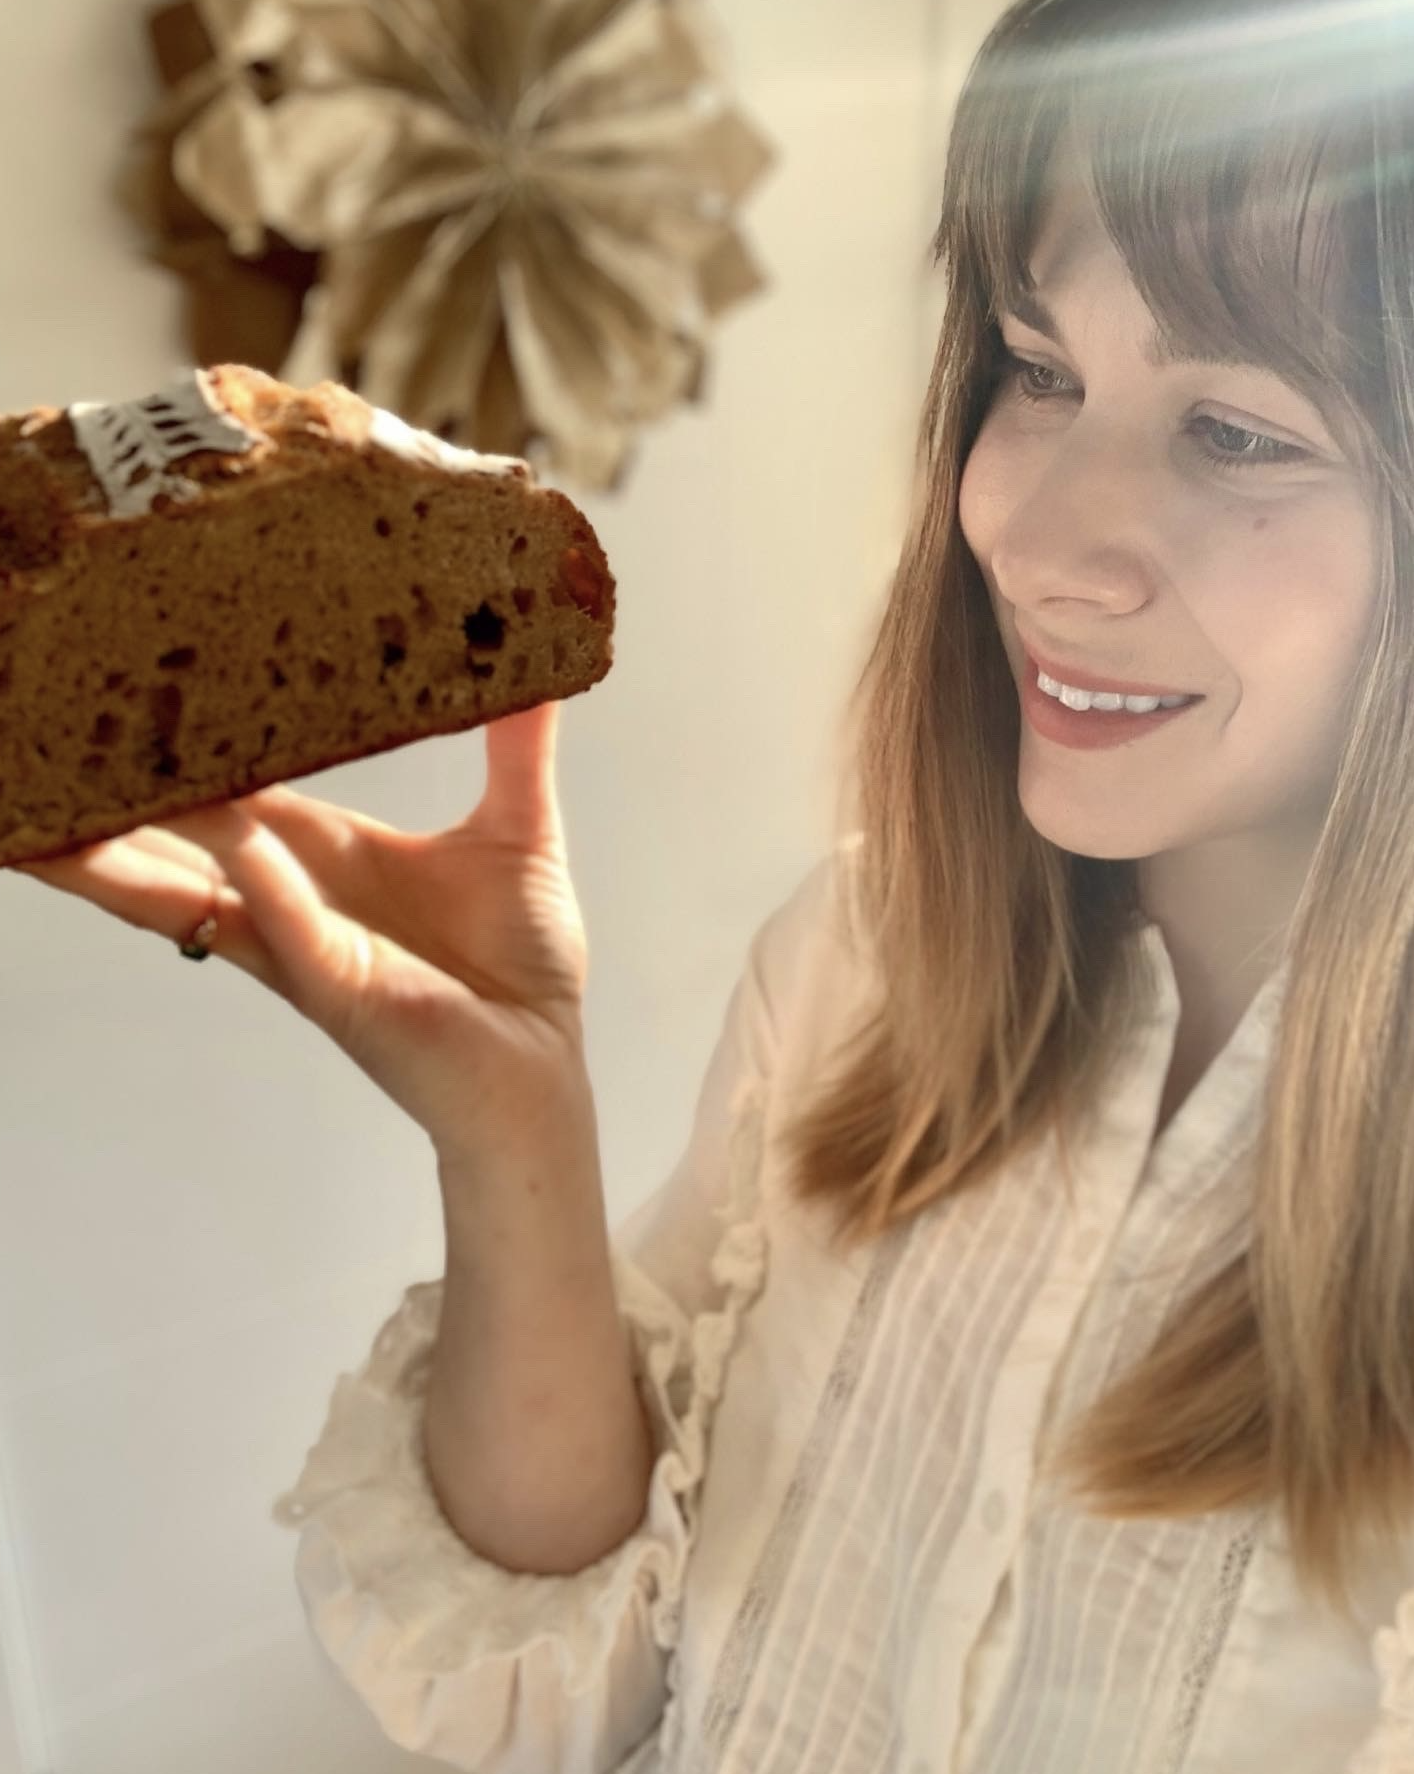 sourdough bread instagram social media influencer content creator on vancouver island in british columbia canada Jaimie from @TheSourdoughFlourist 9